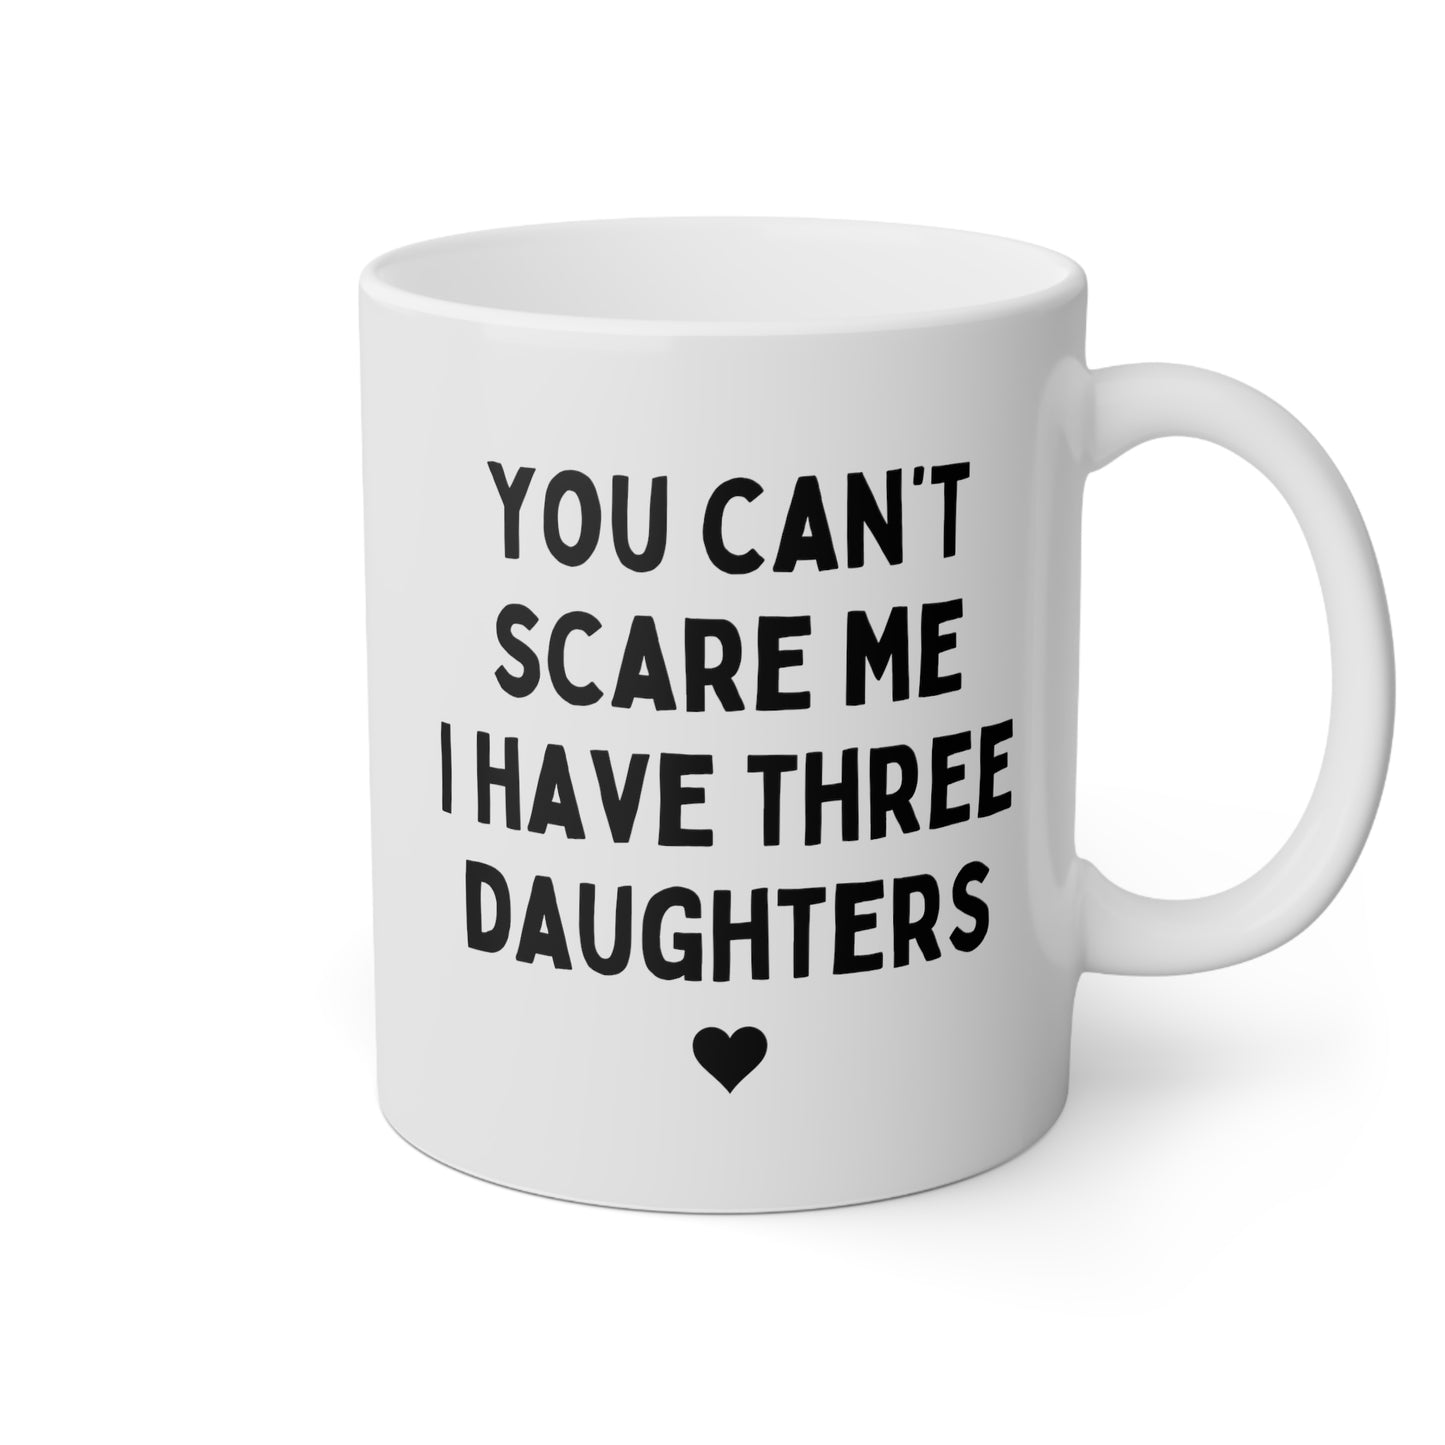 You Can't Scare Me I have Three Daughters 11oz white funny large coffee mug gift for fathers day dad husband grandpa tea cup waveywares wavey wares wavywares wavy wares